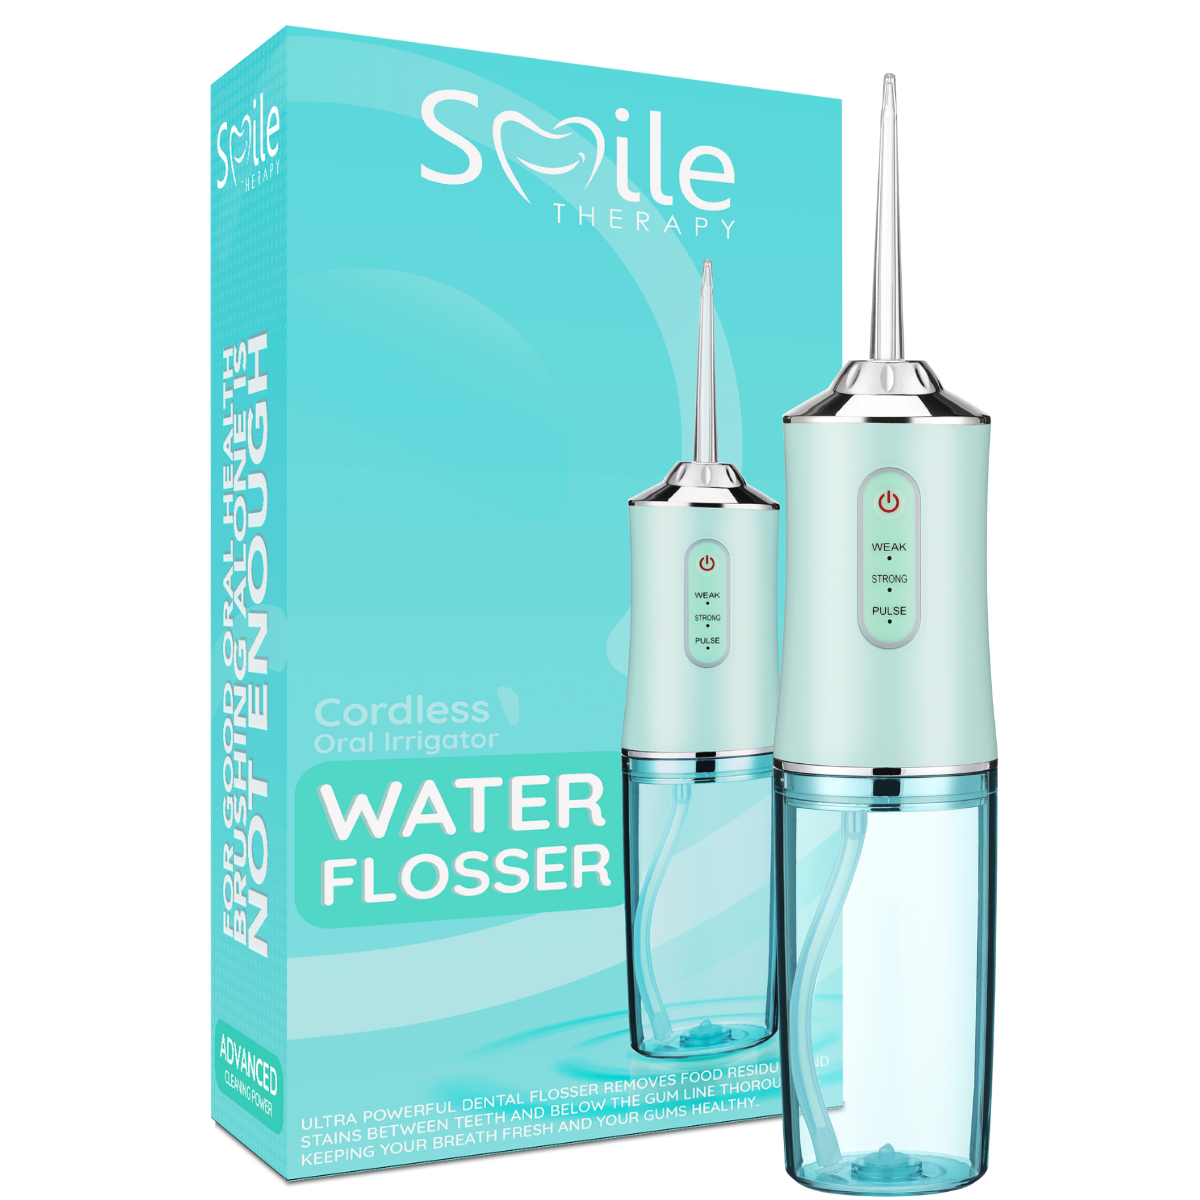 Dental Wireless 4 in 1 Water Flosser - Smile Therapy